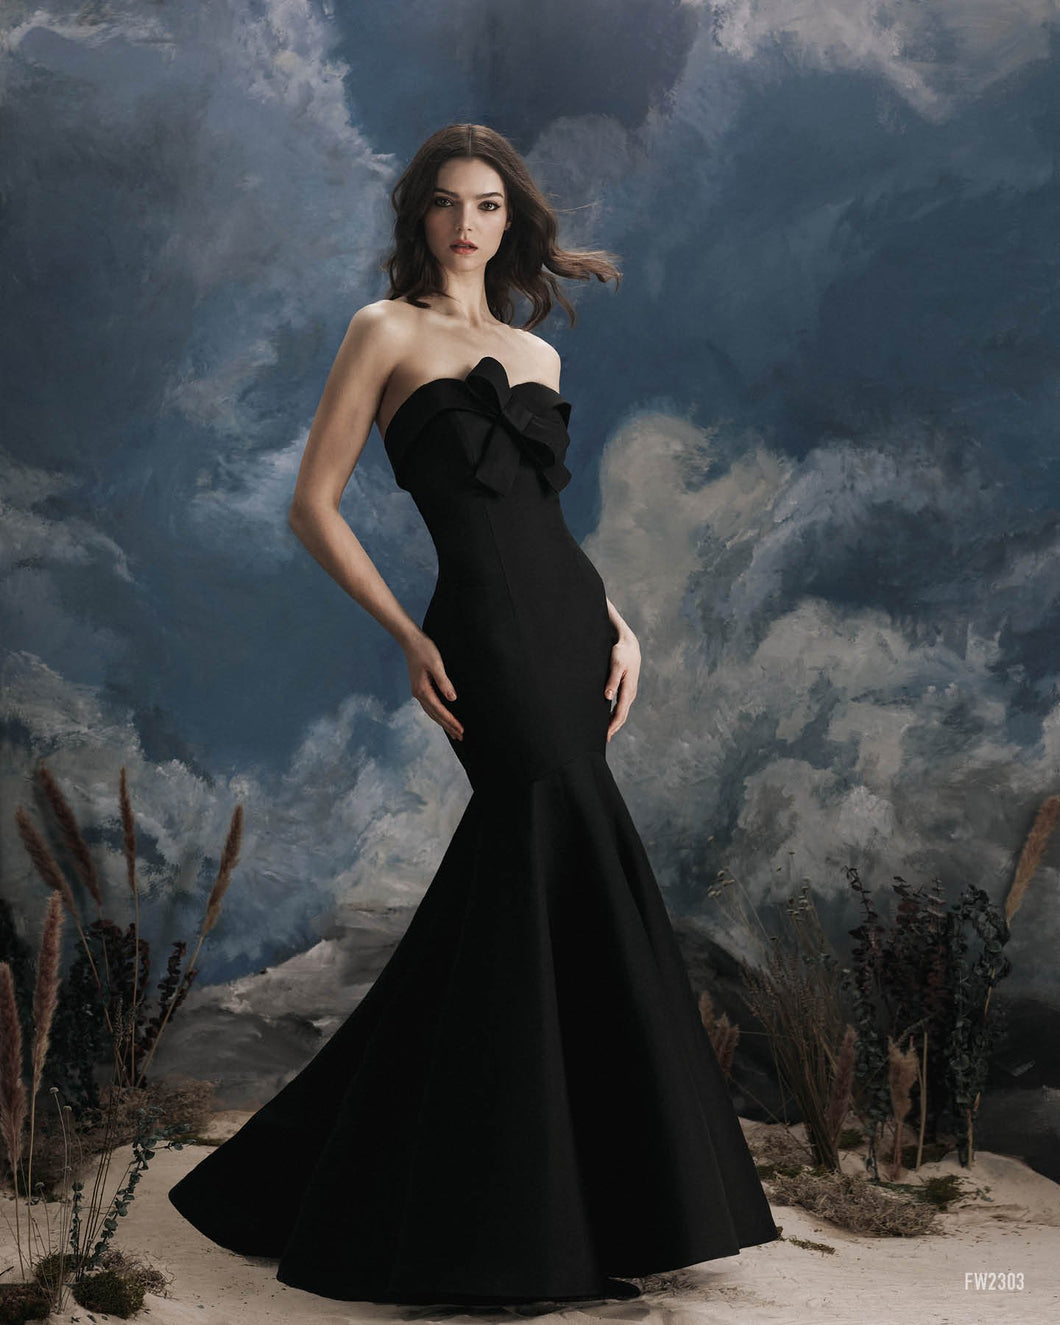 Lucian Matis Strapless Black Evening Gown with Double Bows EVENING DRESSES, LONG DRESS, MOTHER OF THE BRIDE DRESS, MOTHER OF THE GROOM DRESS, WEDDING GUEST DRESSES, Long Island, New York, Mother of the Bride gowns near me Woodbury Greenvale Mother of the Bride dresses Bat Mitzvah Bar Mitzvah, Evening Wear Wedding Wear.